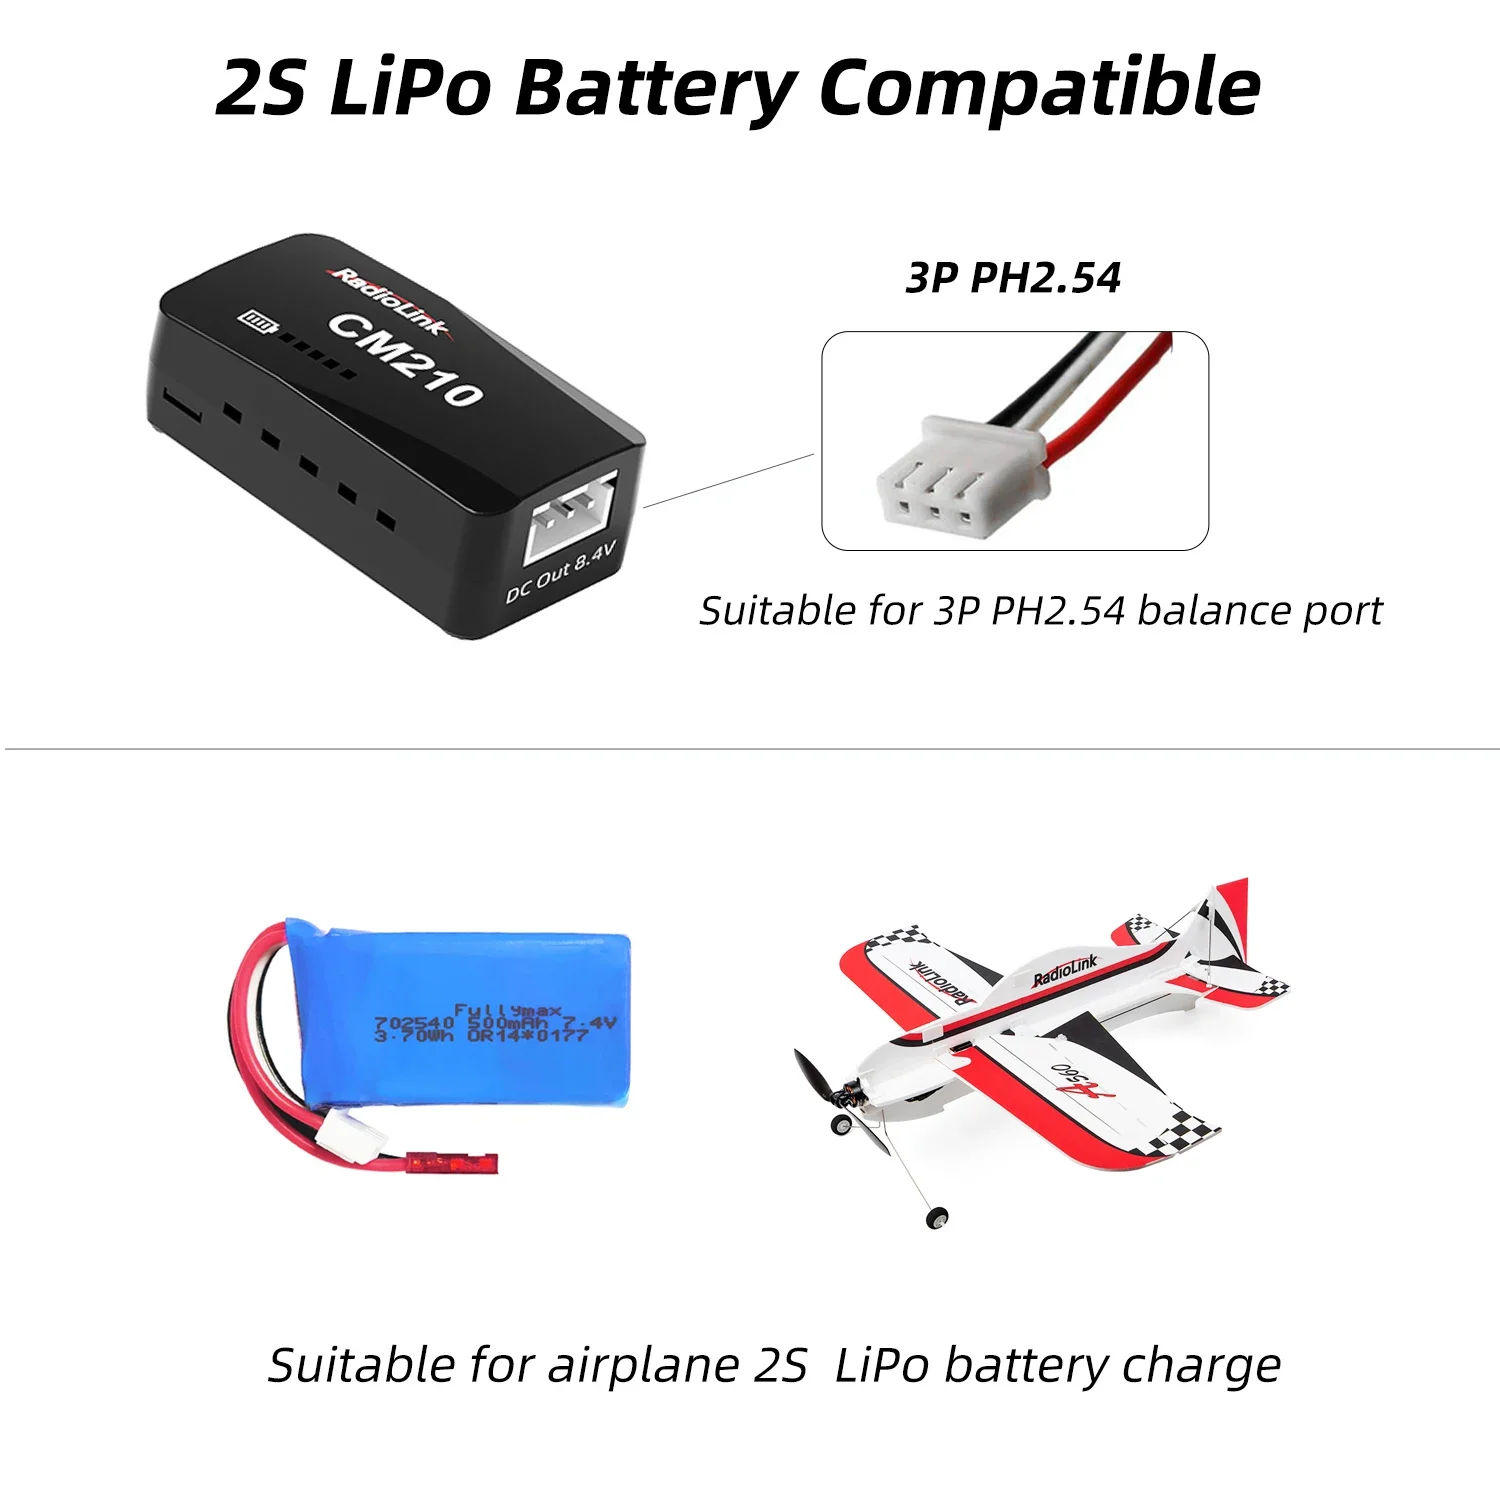 Radiolink CM210 Faster 2s LiPo Battery Charger Mini Size USB Type-C Connector, Power Supply Self-adapting images - 6